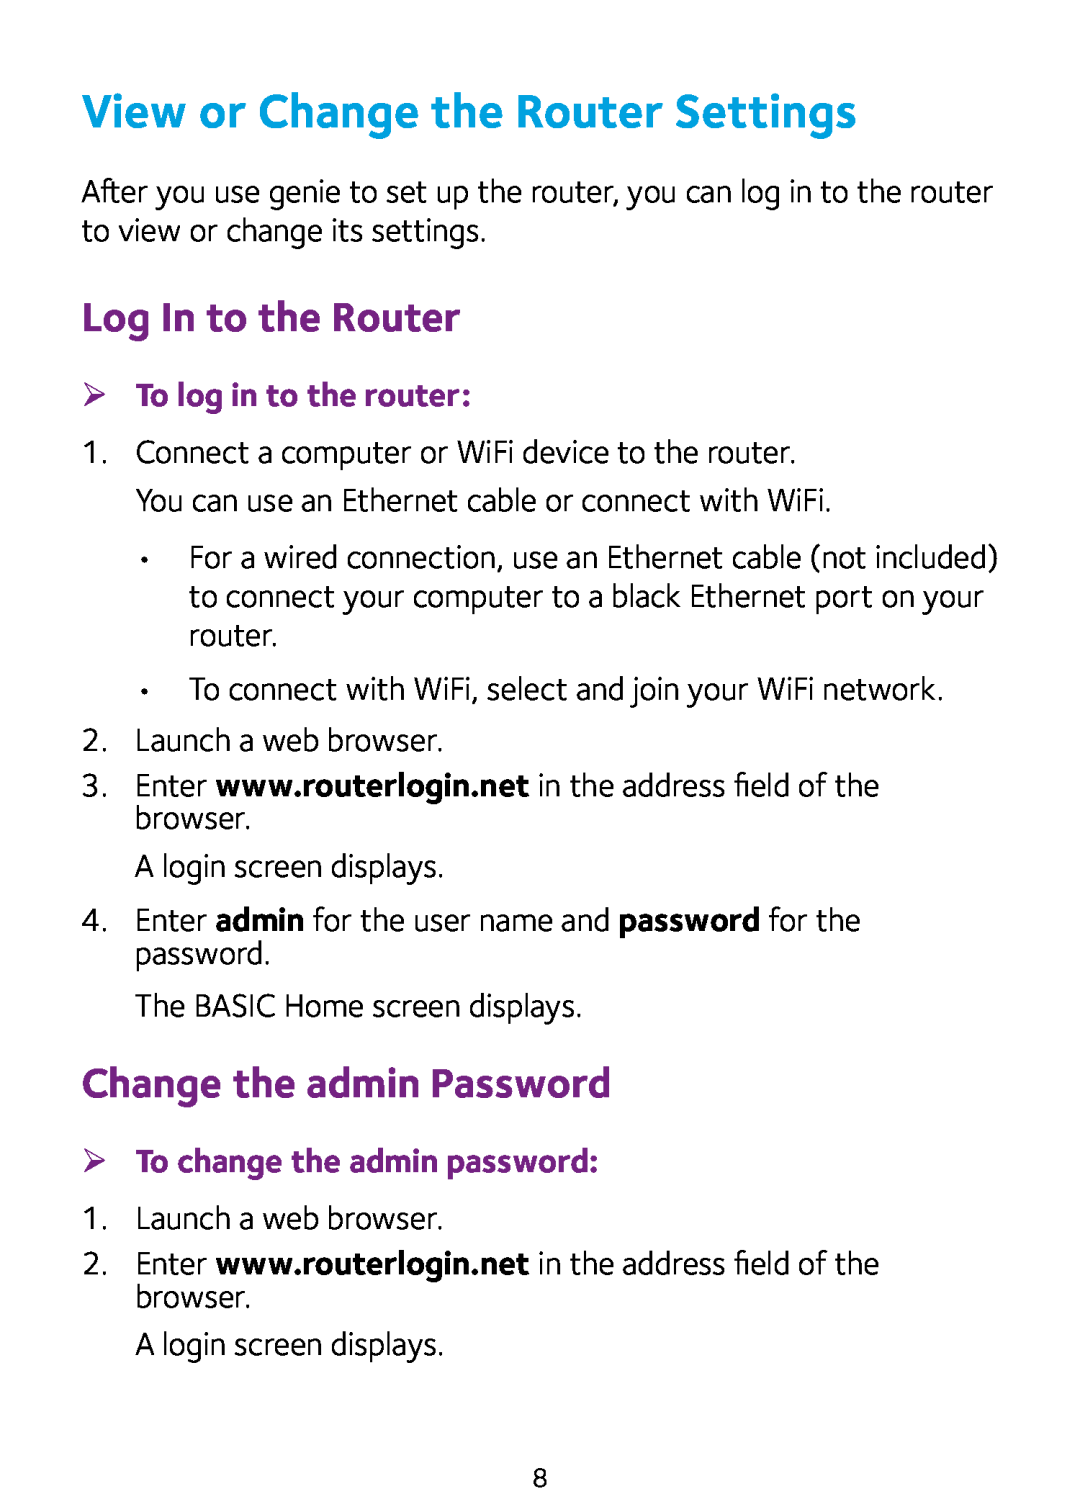 NETGEAR R8000 quick start View or Change the Router Settings, Log In to the Router, Change the admin Password 